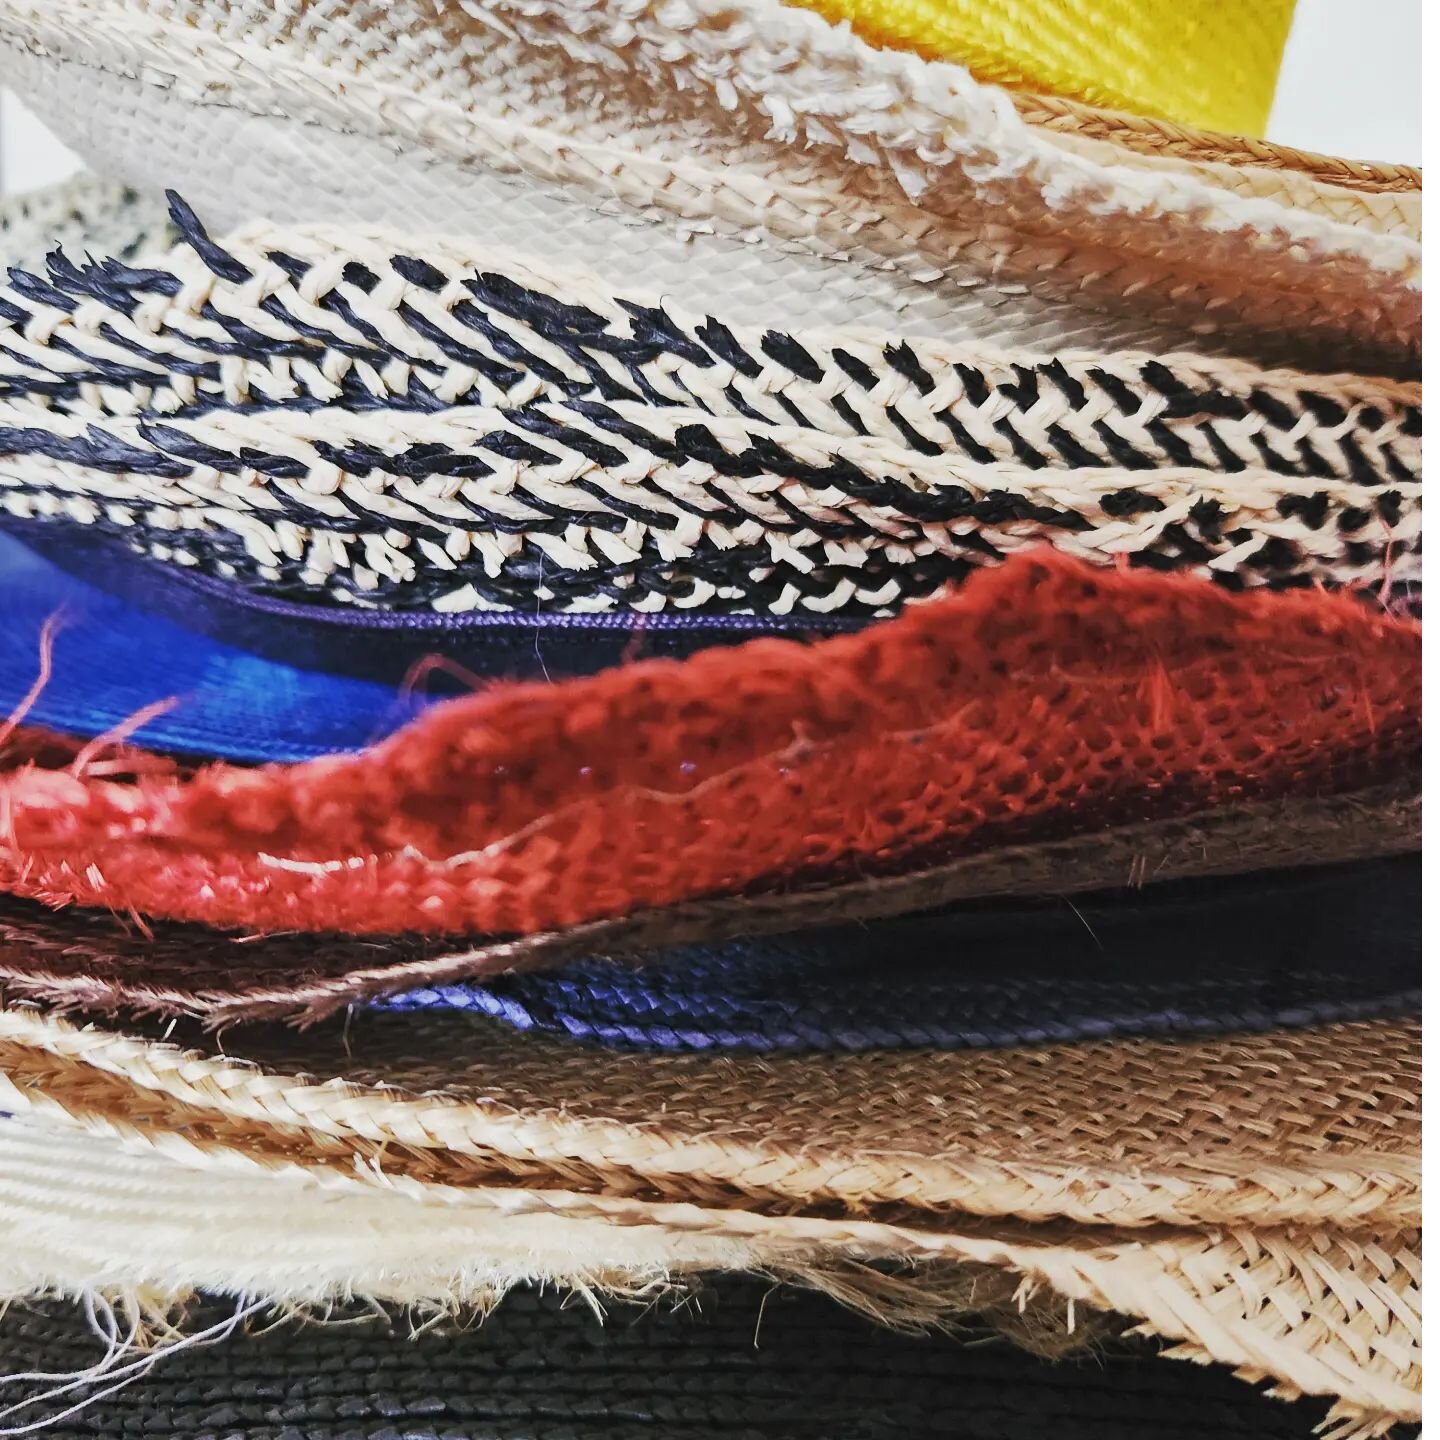 This time of year, there's more focus time in the studio than on social media. We're working on hats! What are you making?

#hats #millinery #headwear #headweardesigner #springfashion #derby #markets